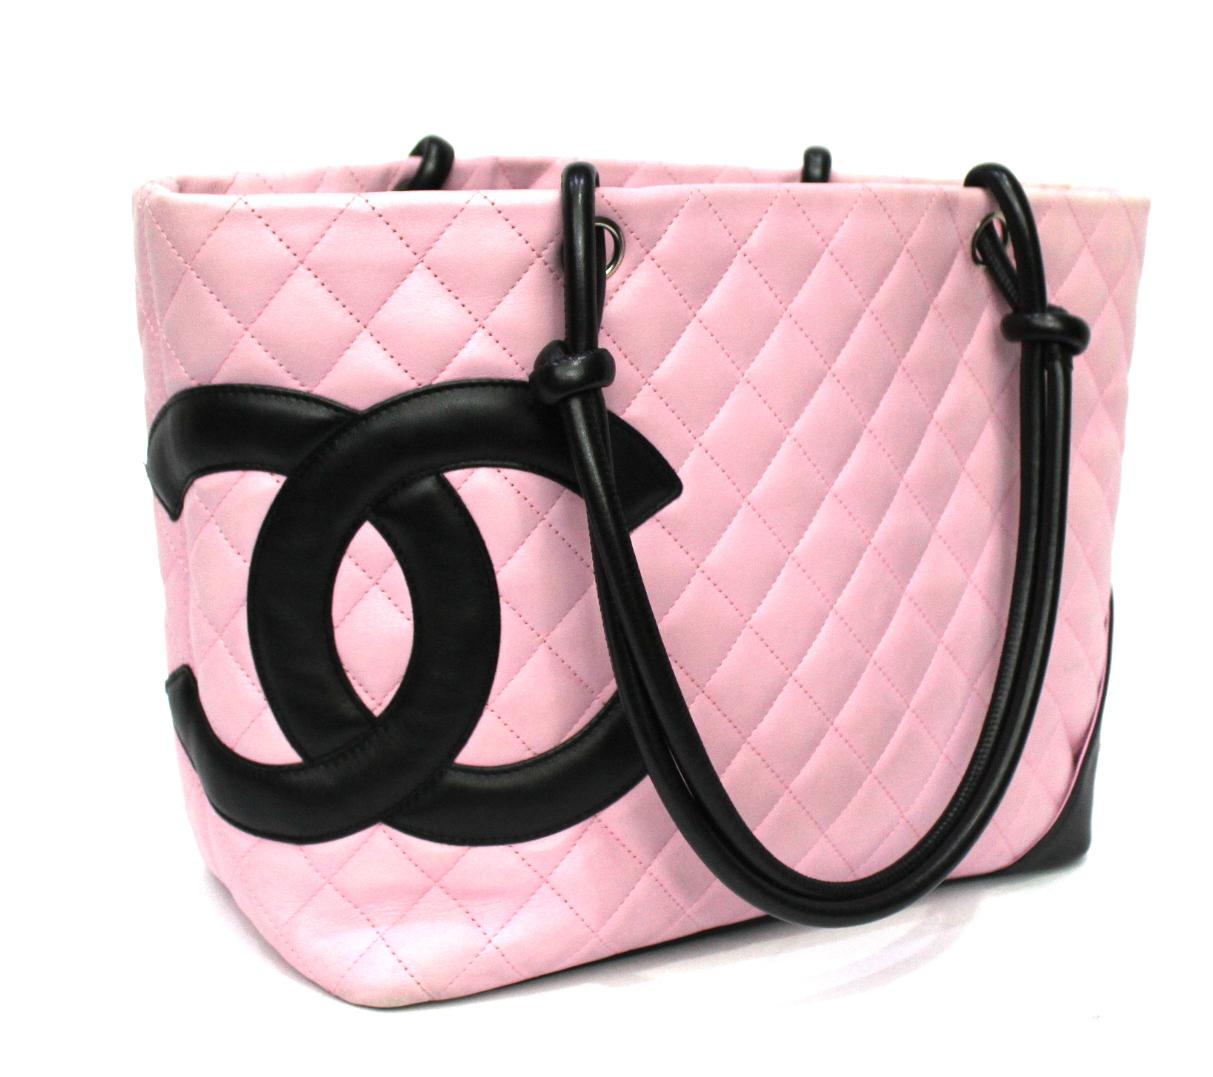 Fantastic Chanel Cambon model shopper bag made of pink and black leather.
Equipped with leather handles, zip closure, very large inside. The bag is in good condition except for slight signs of wear.